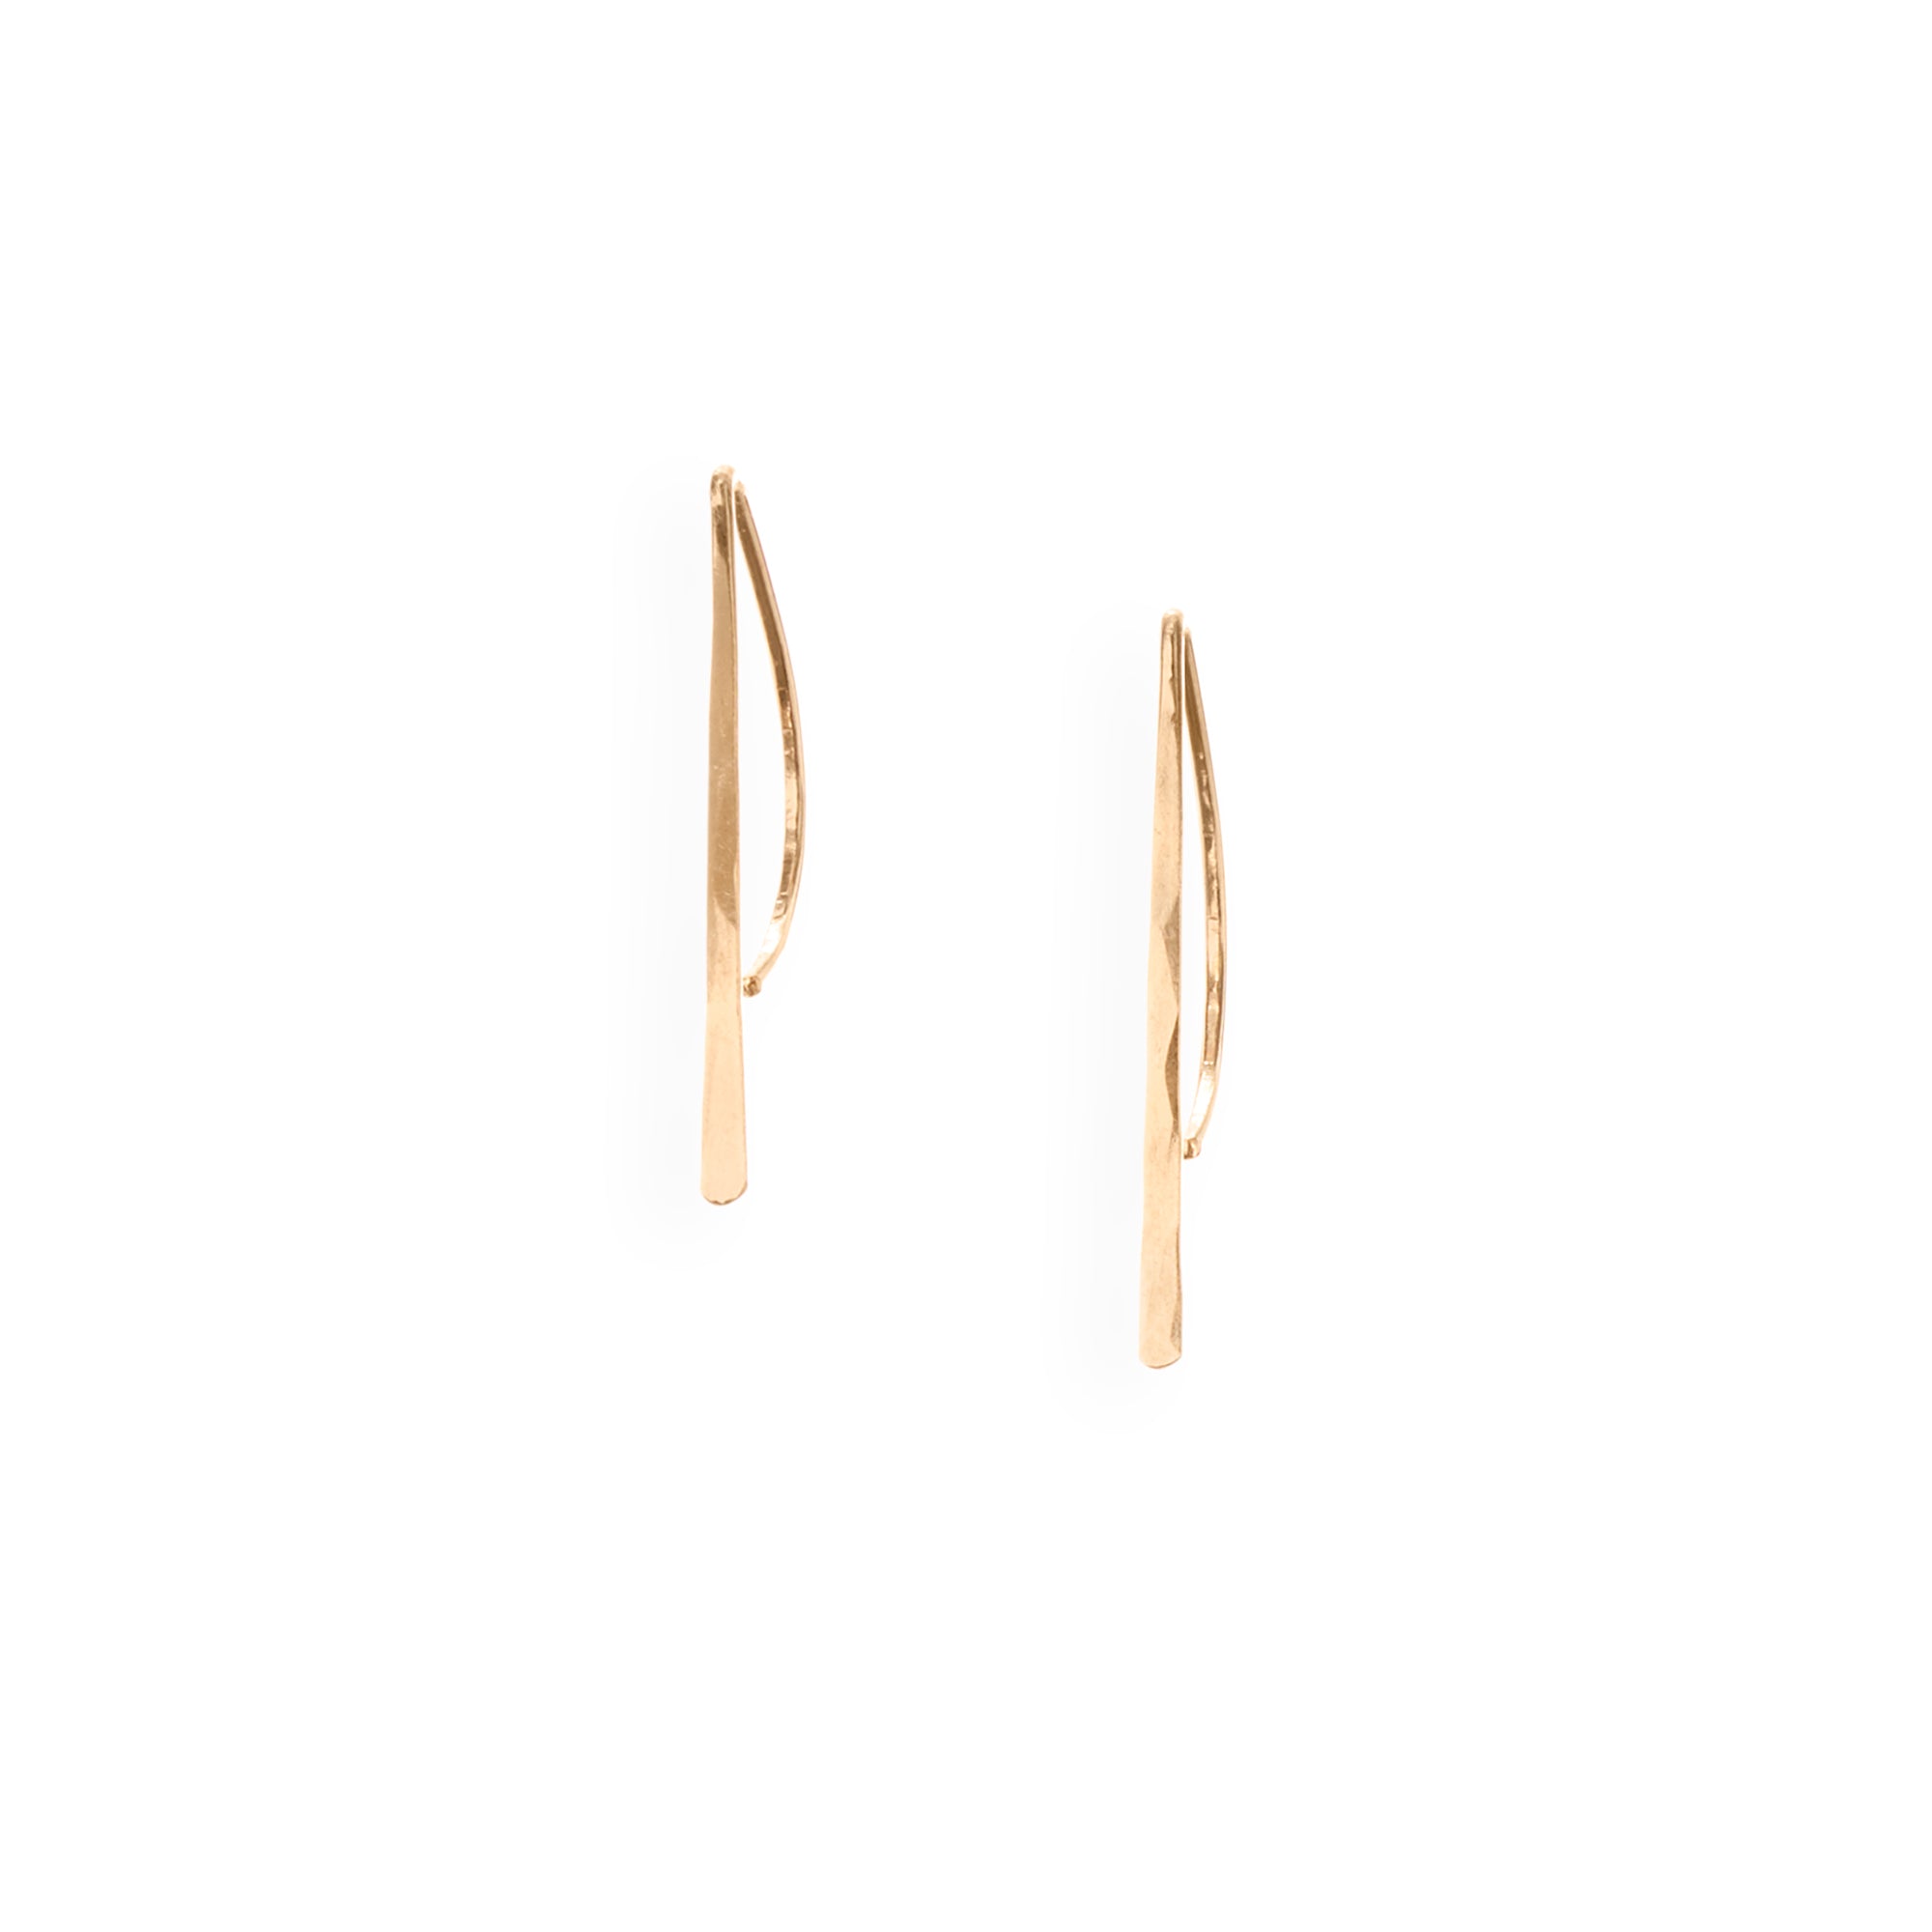 14k gold Bow Hook, delicate threader earrings feature a forged wire front and an arch that hangs behind the earlobe